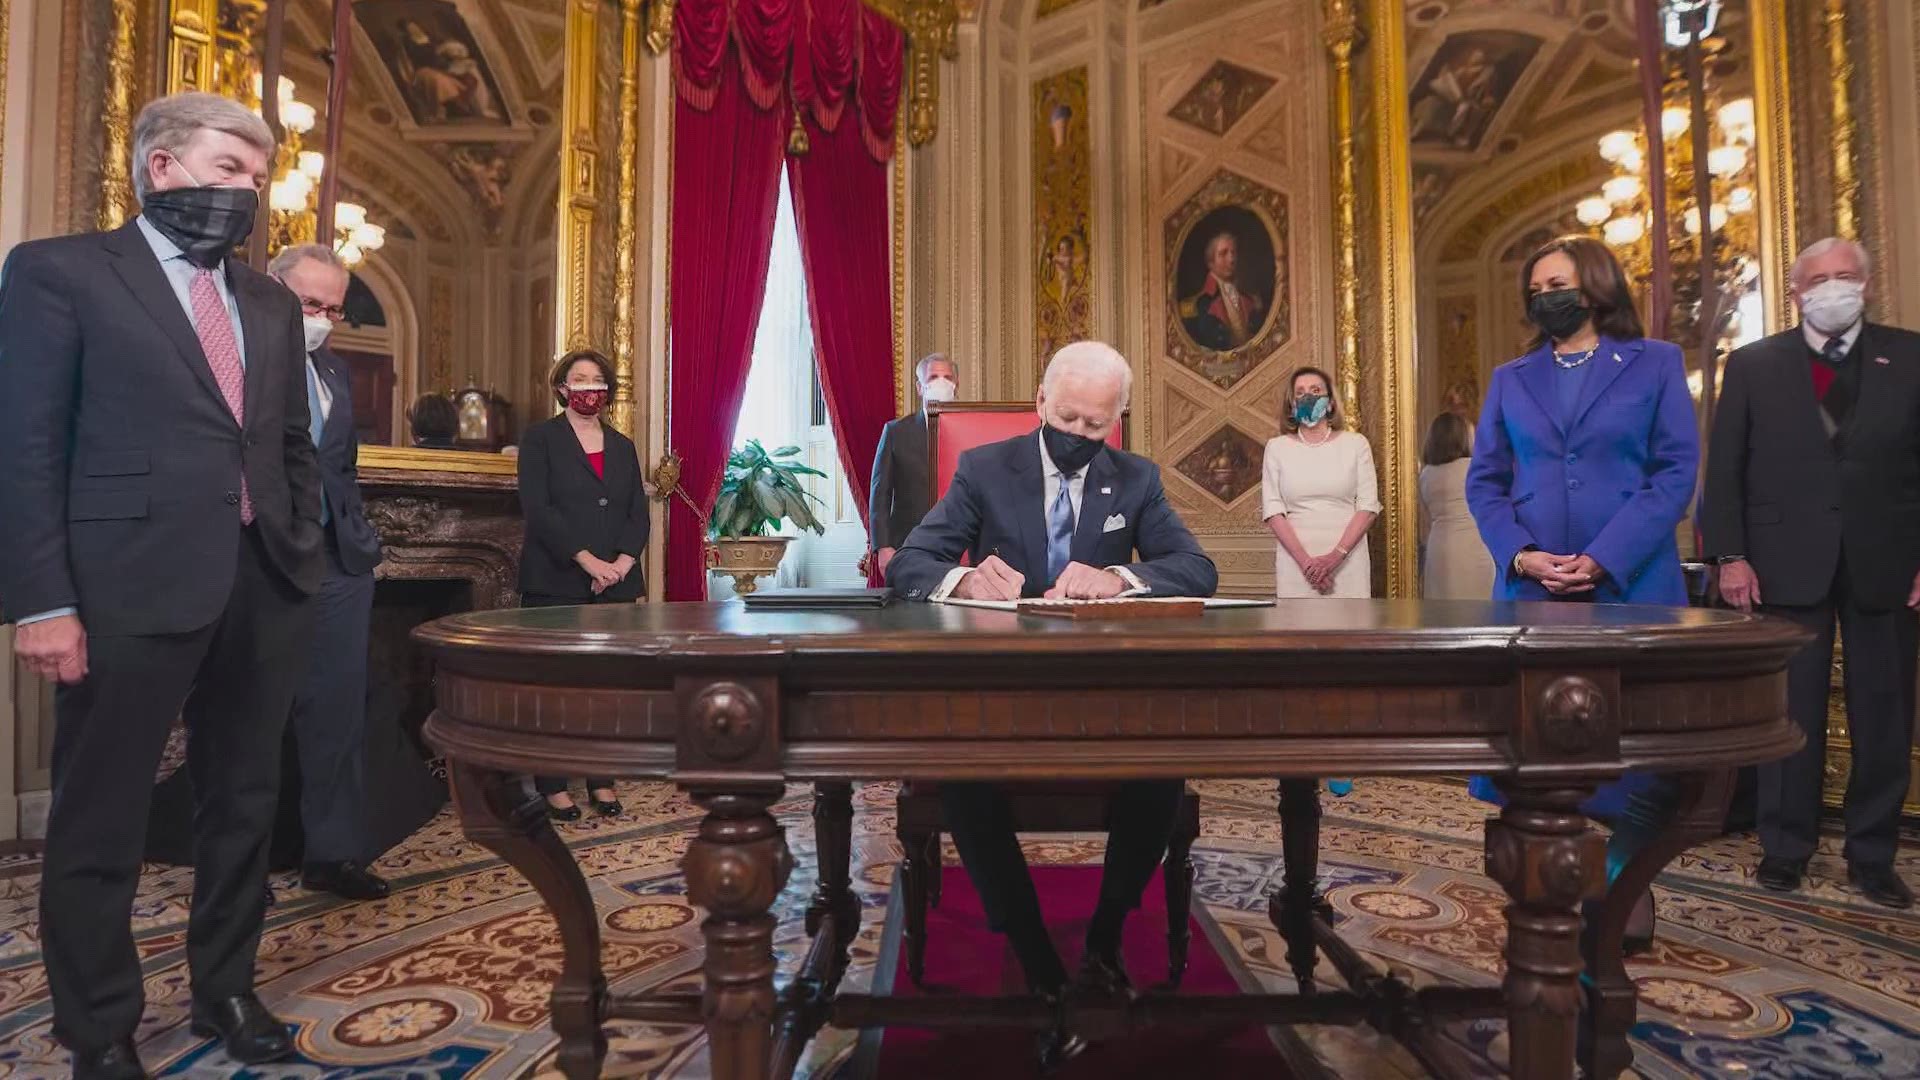 President Joe Biden's new COVID-19 plan calls for listening to science, restoring ties with the WHO and investing billions in testing and vaccines.